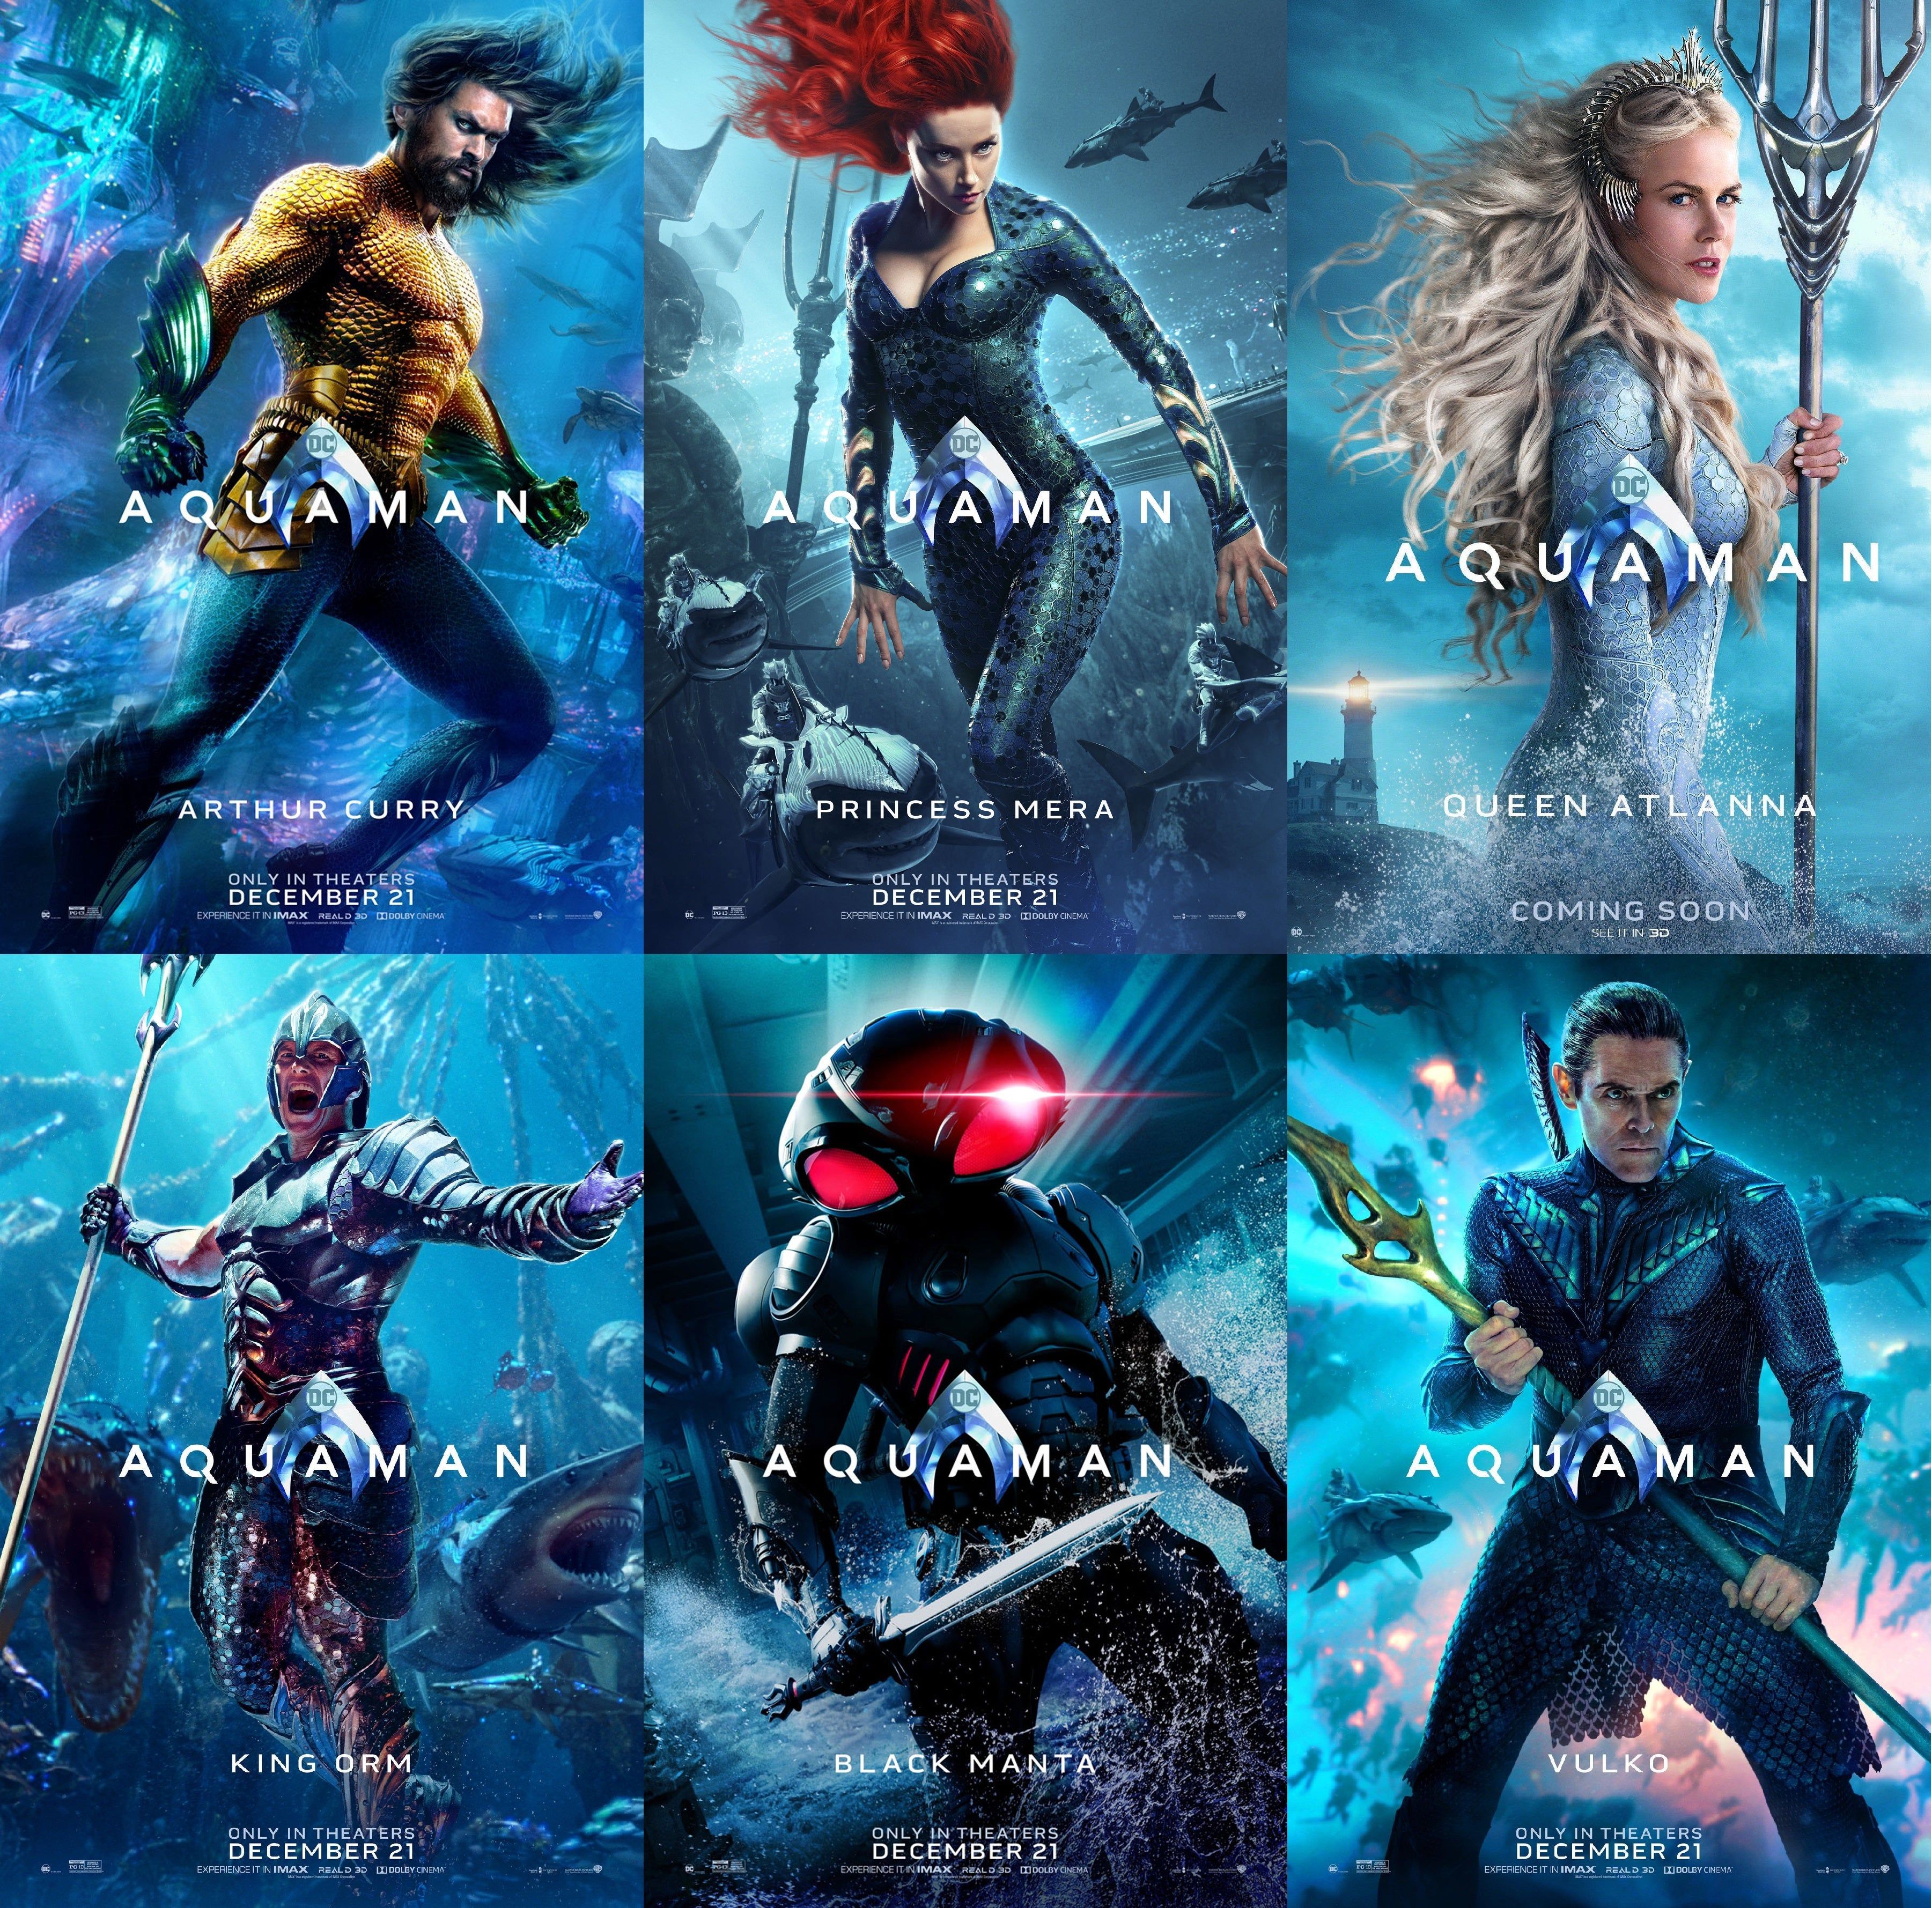 OTHER: I Combined The Aquaman Posters Into A Single Image (HD). The Format Isn't Very Wallpaper Friendly But It Still Looks Awesome!, R DC_Cinematic